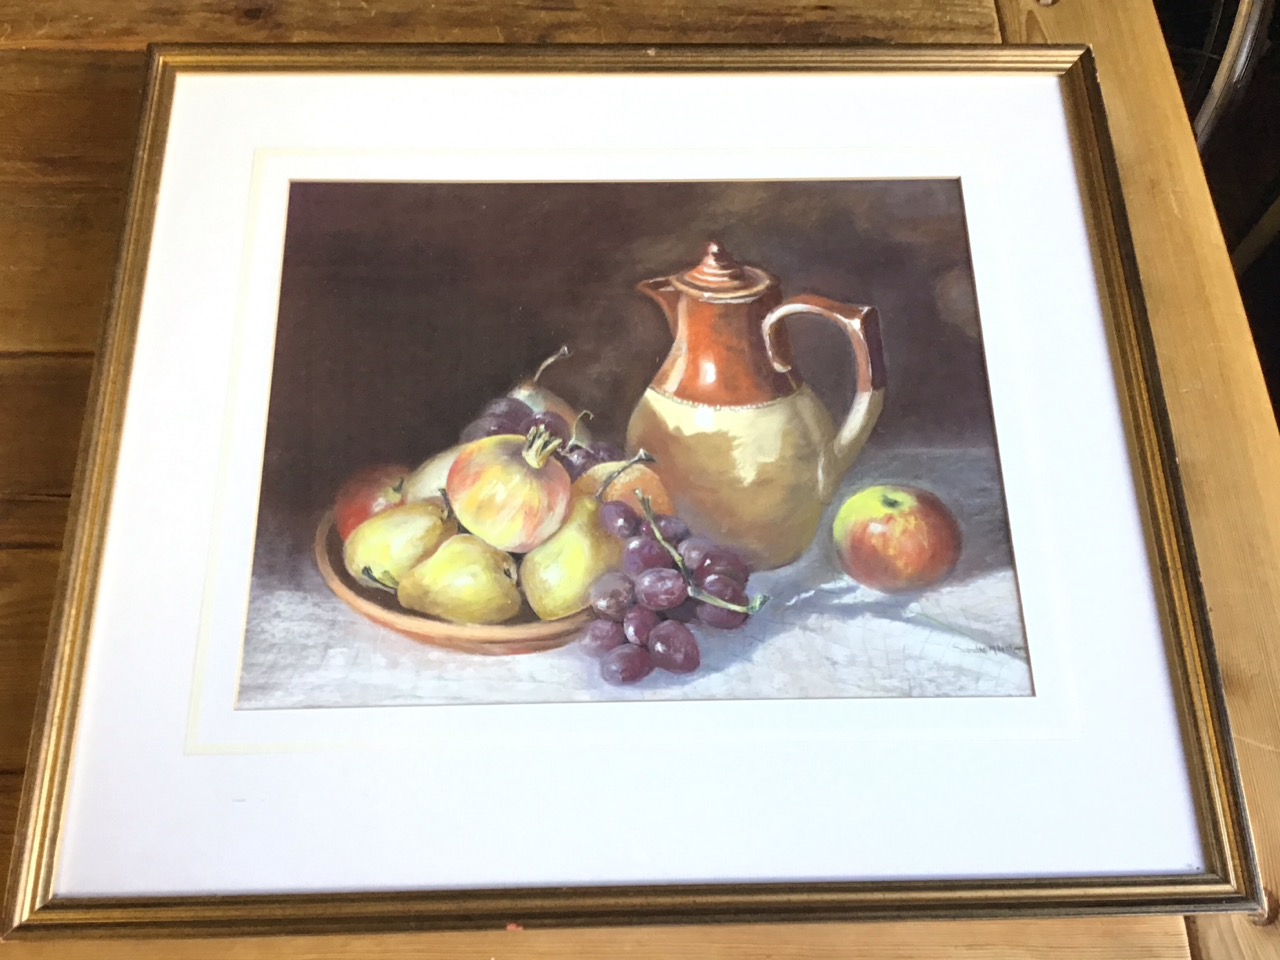 Sandra M Lister, pastel, still life with plate of fruit and stoneware jug, signed, mounted & gilt